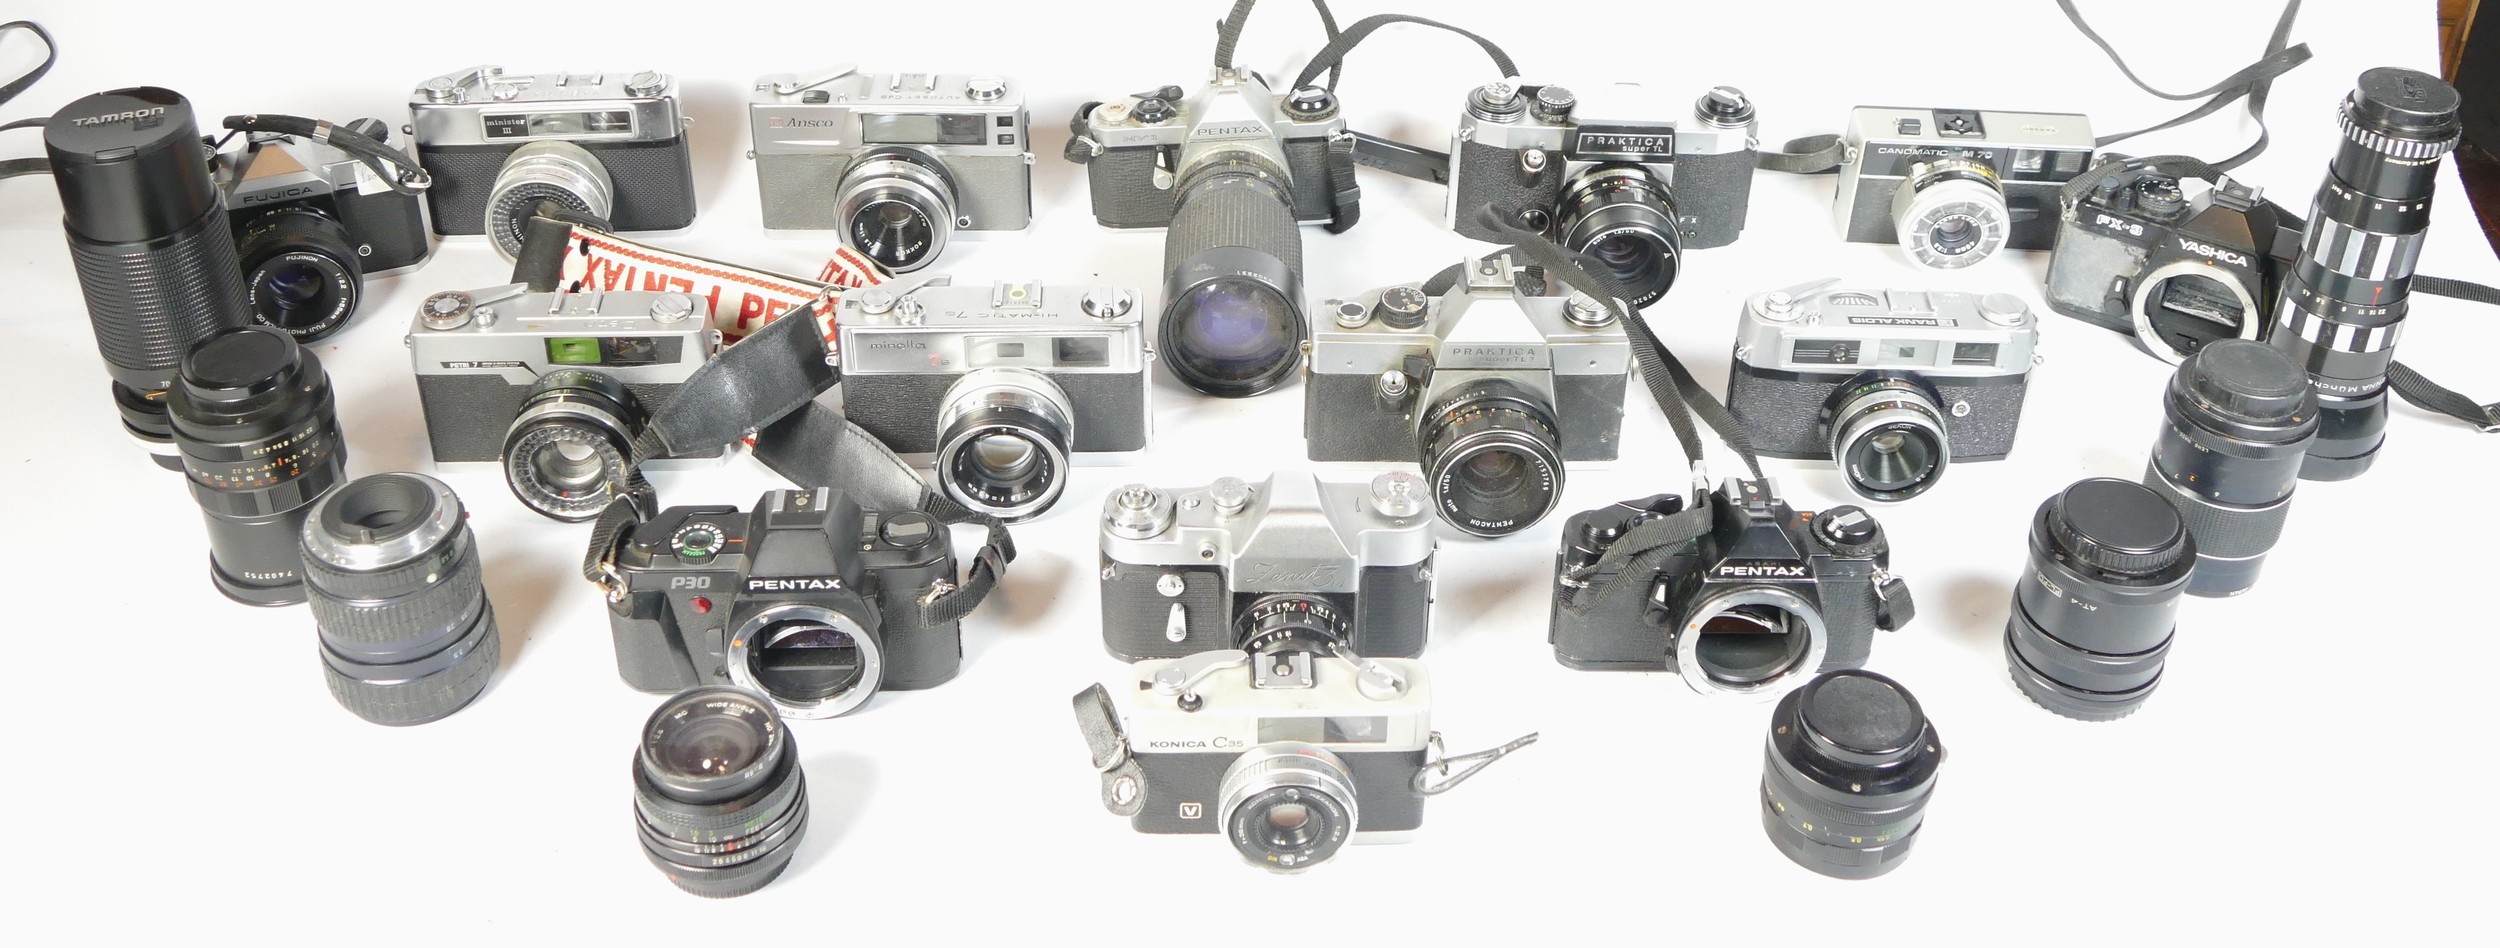 Fifteen SLR vintage film cameras to include a Yashica FX3, a Pentax MV1, a Canon M70 and a Minolta